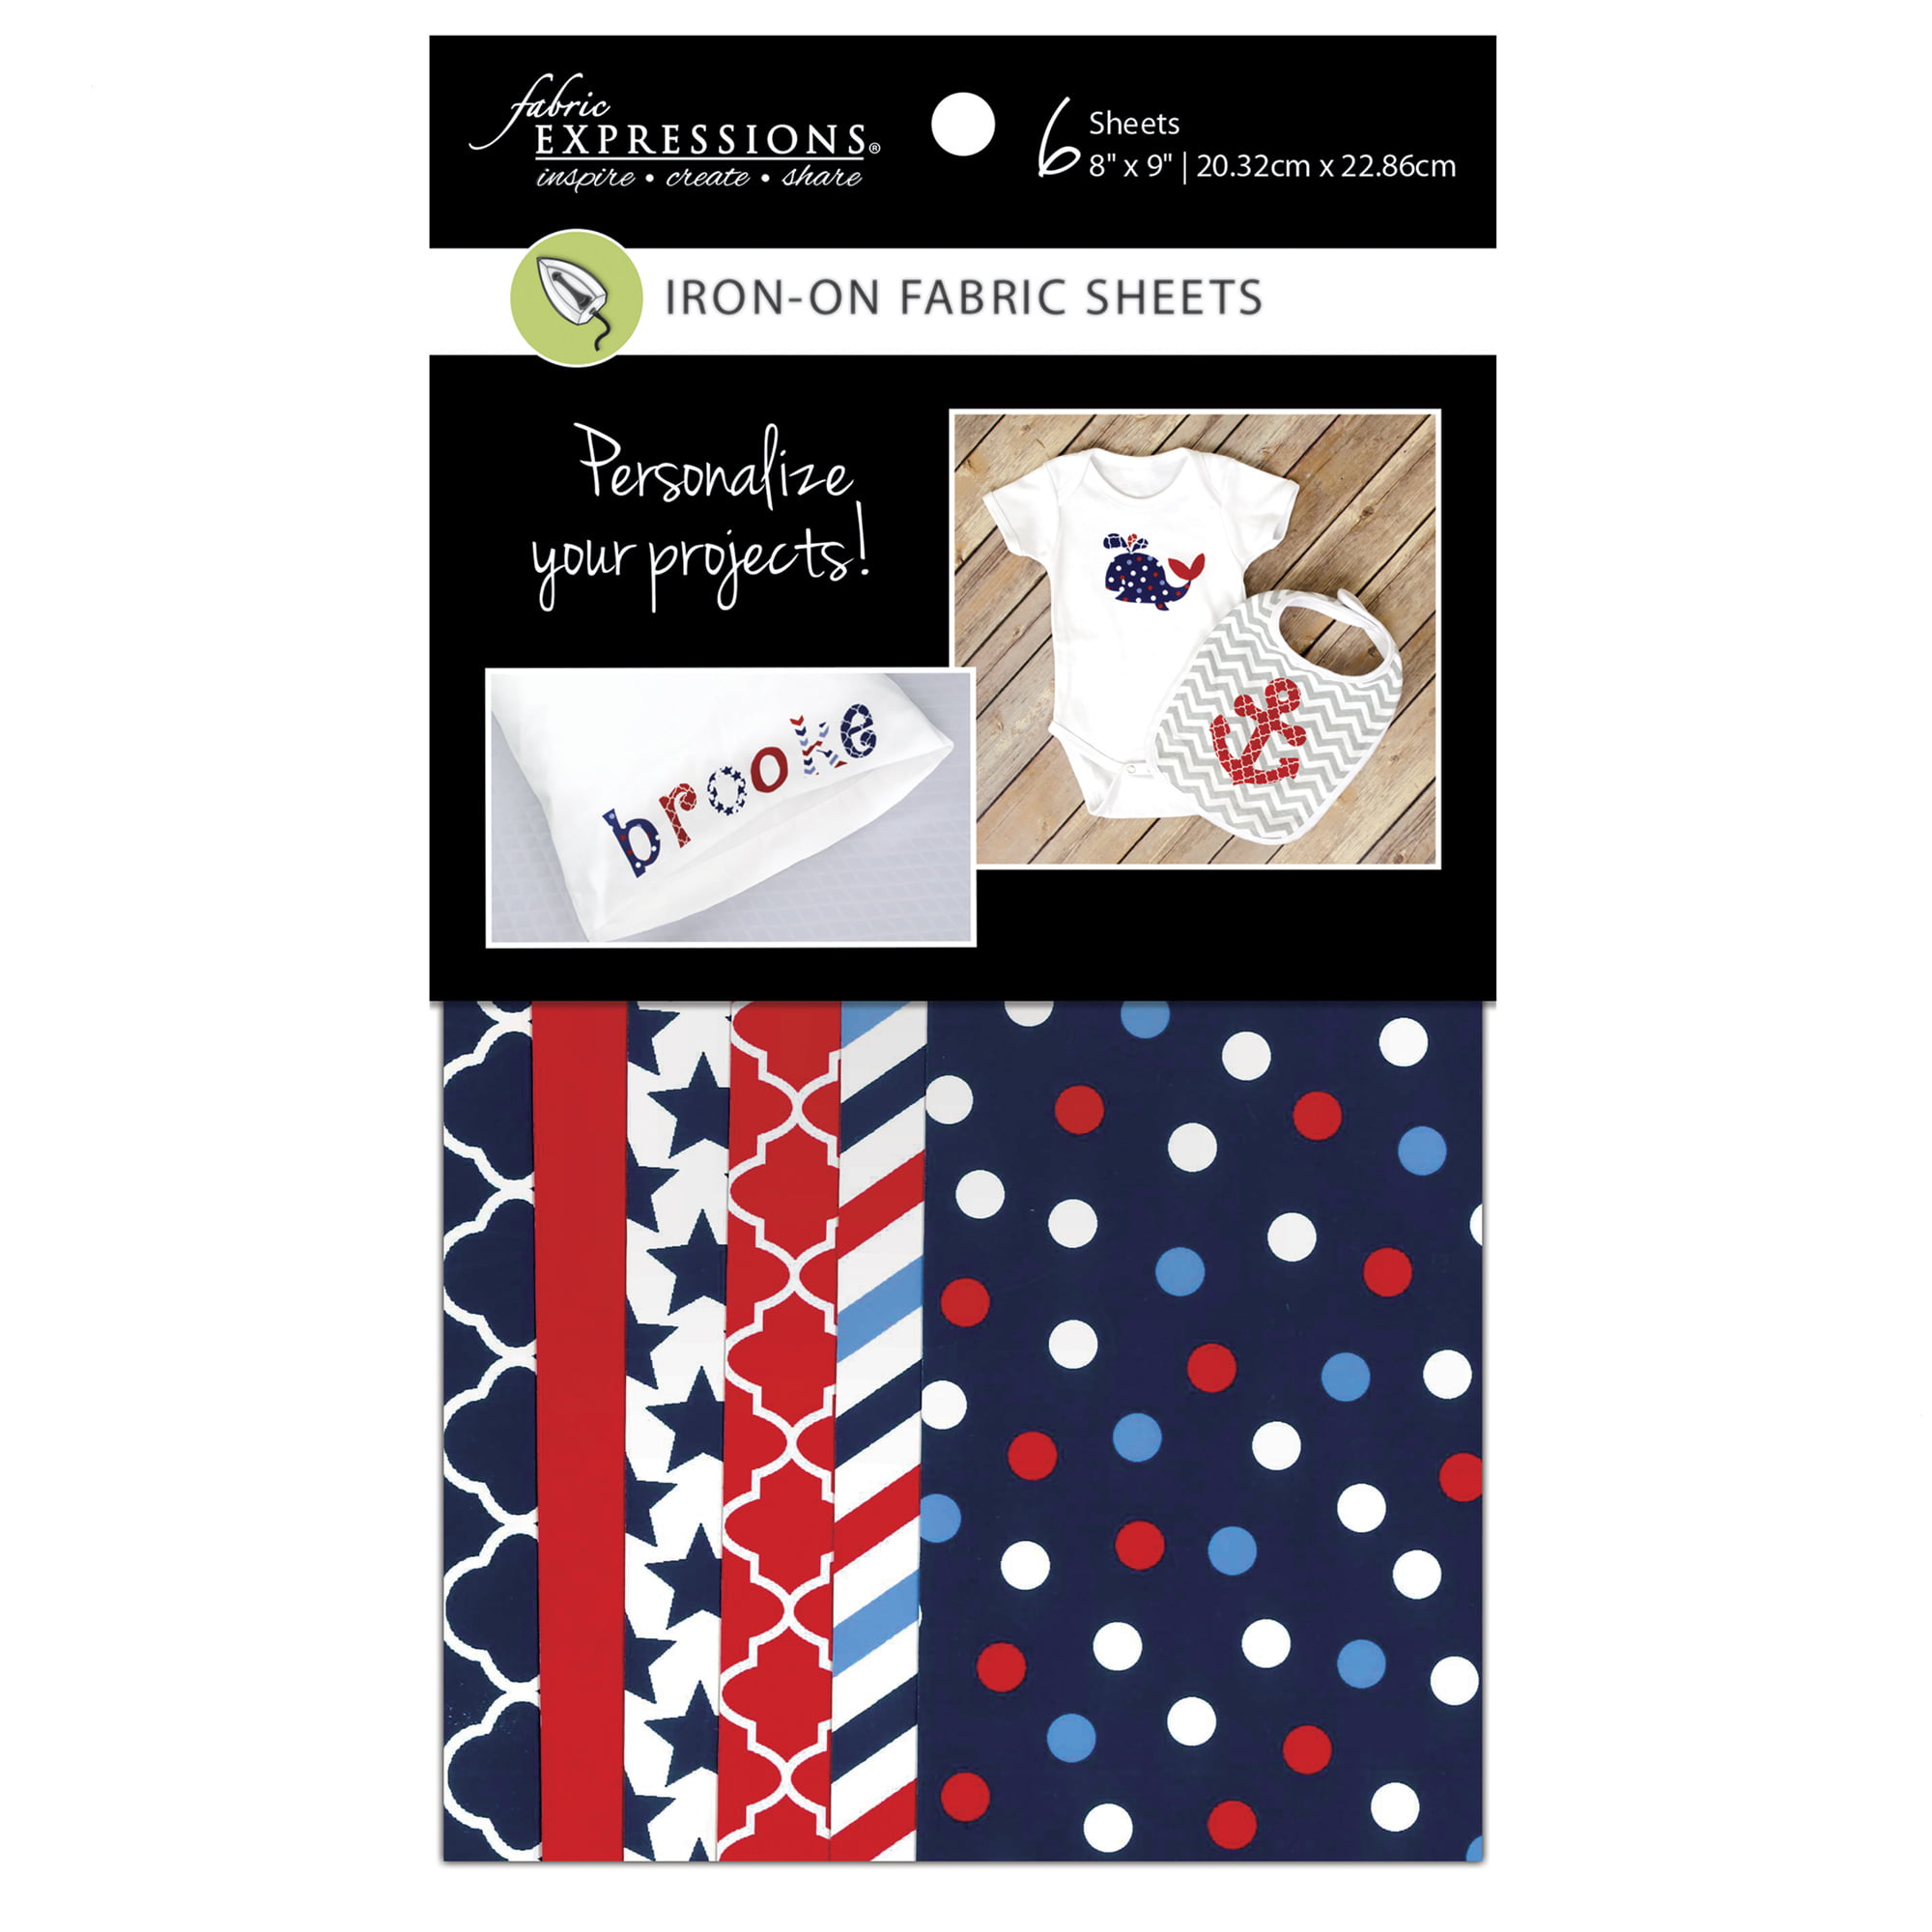 Iron-On Fabric Sheets - Red White and Blue